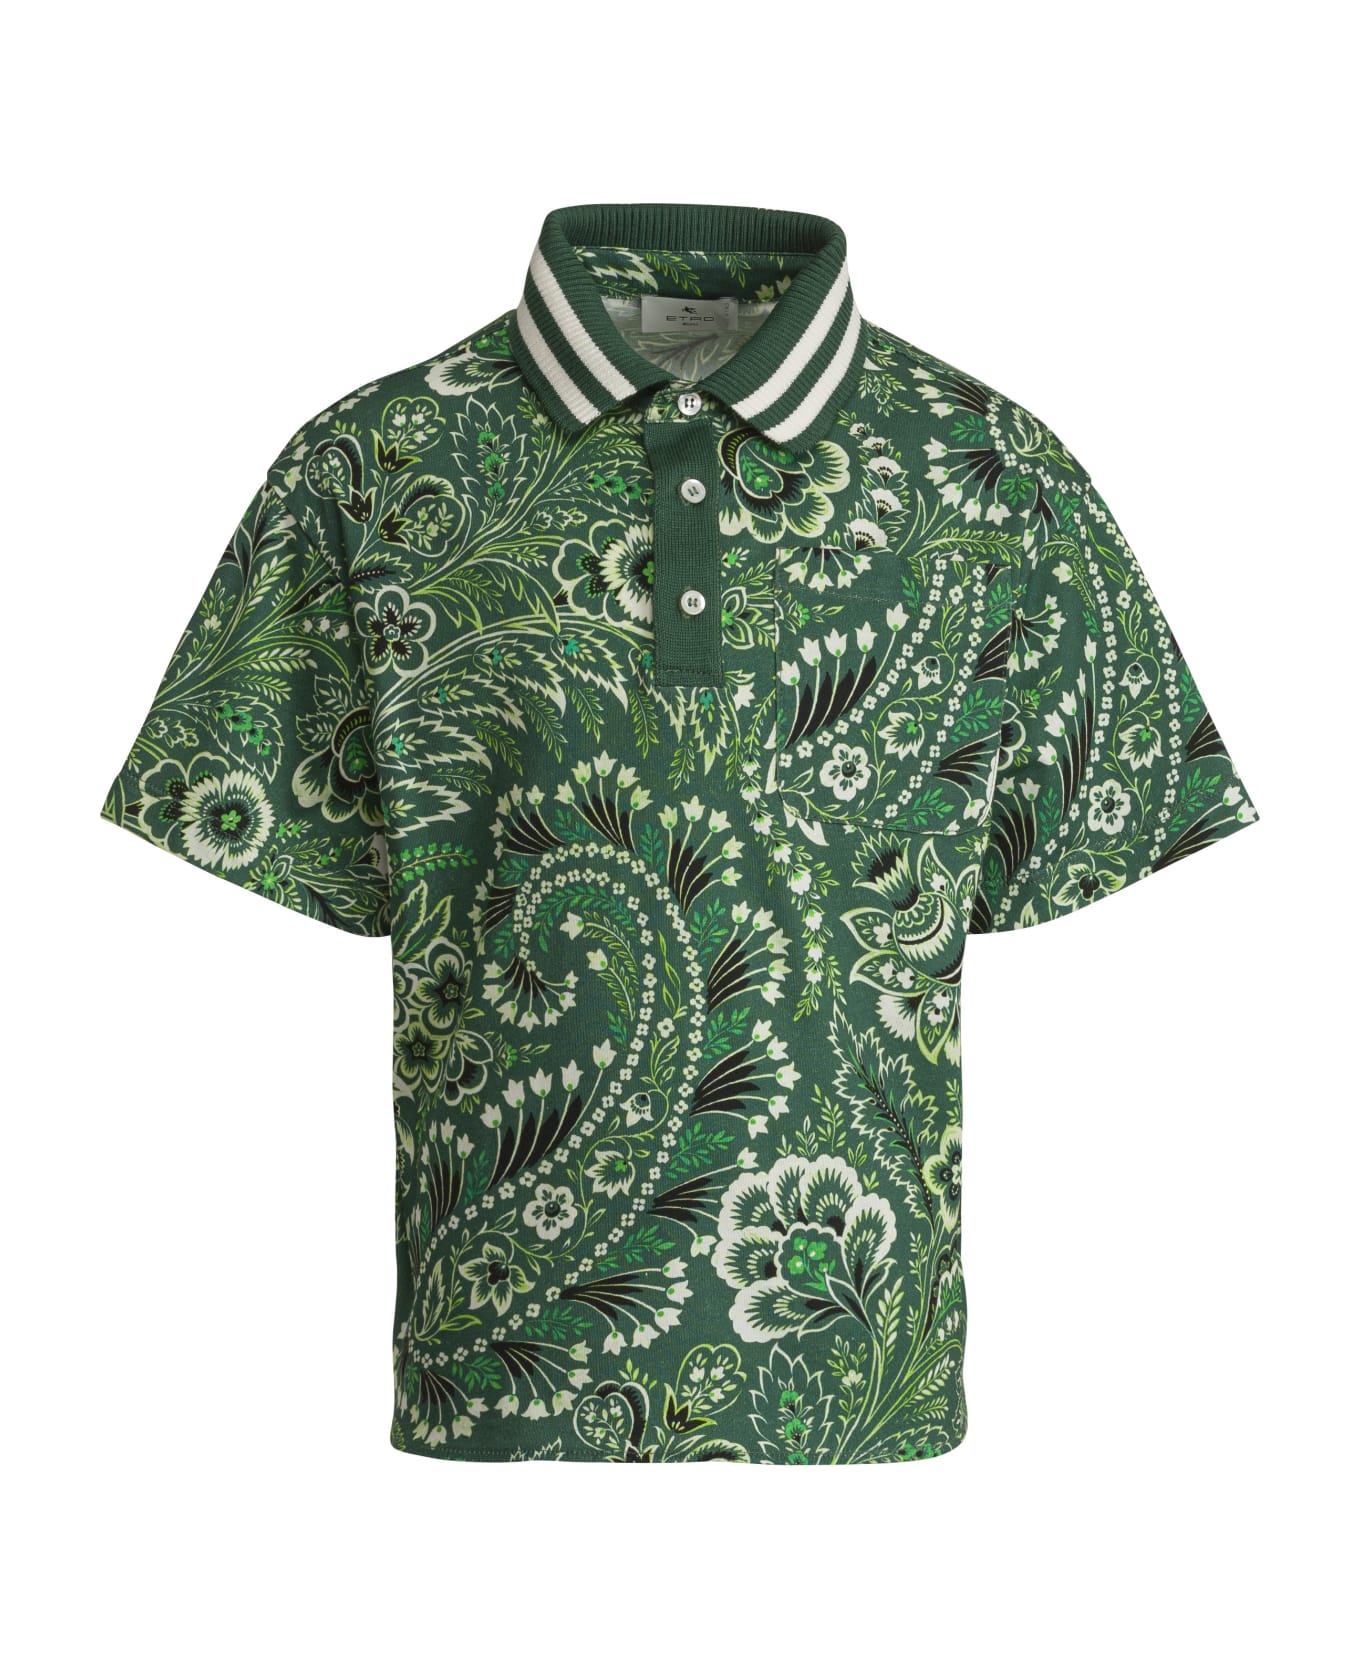 Etro Polo Shirt With Paisley Print - Green アクセサリー＆ギフト